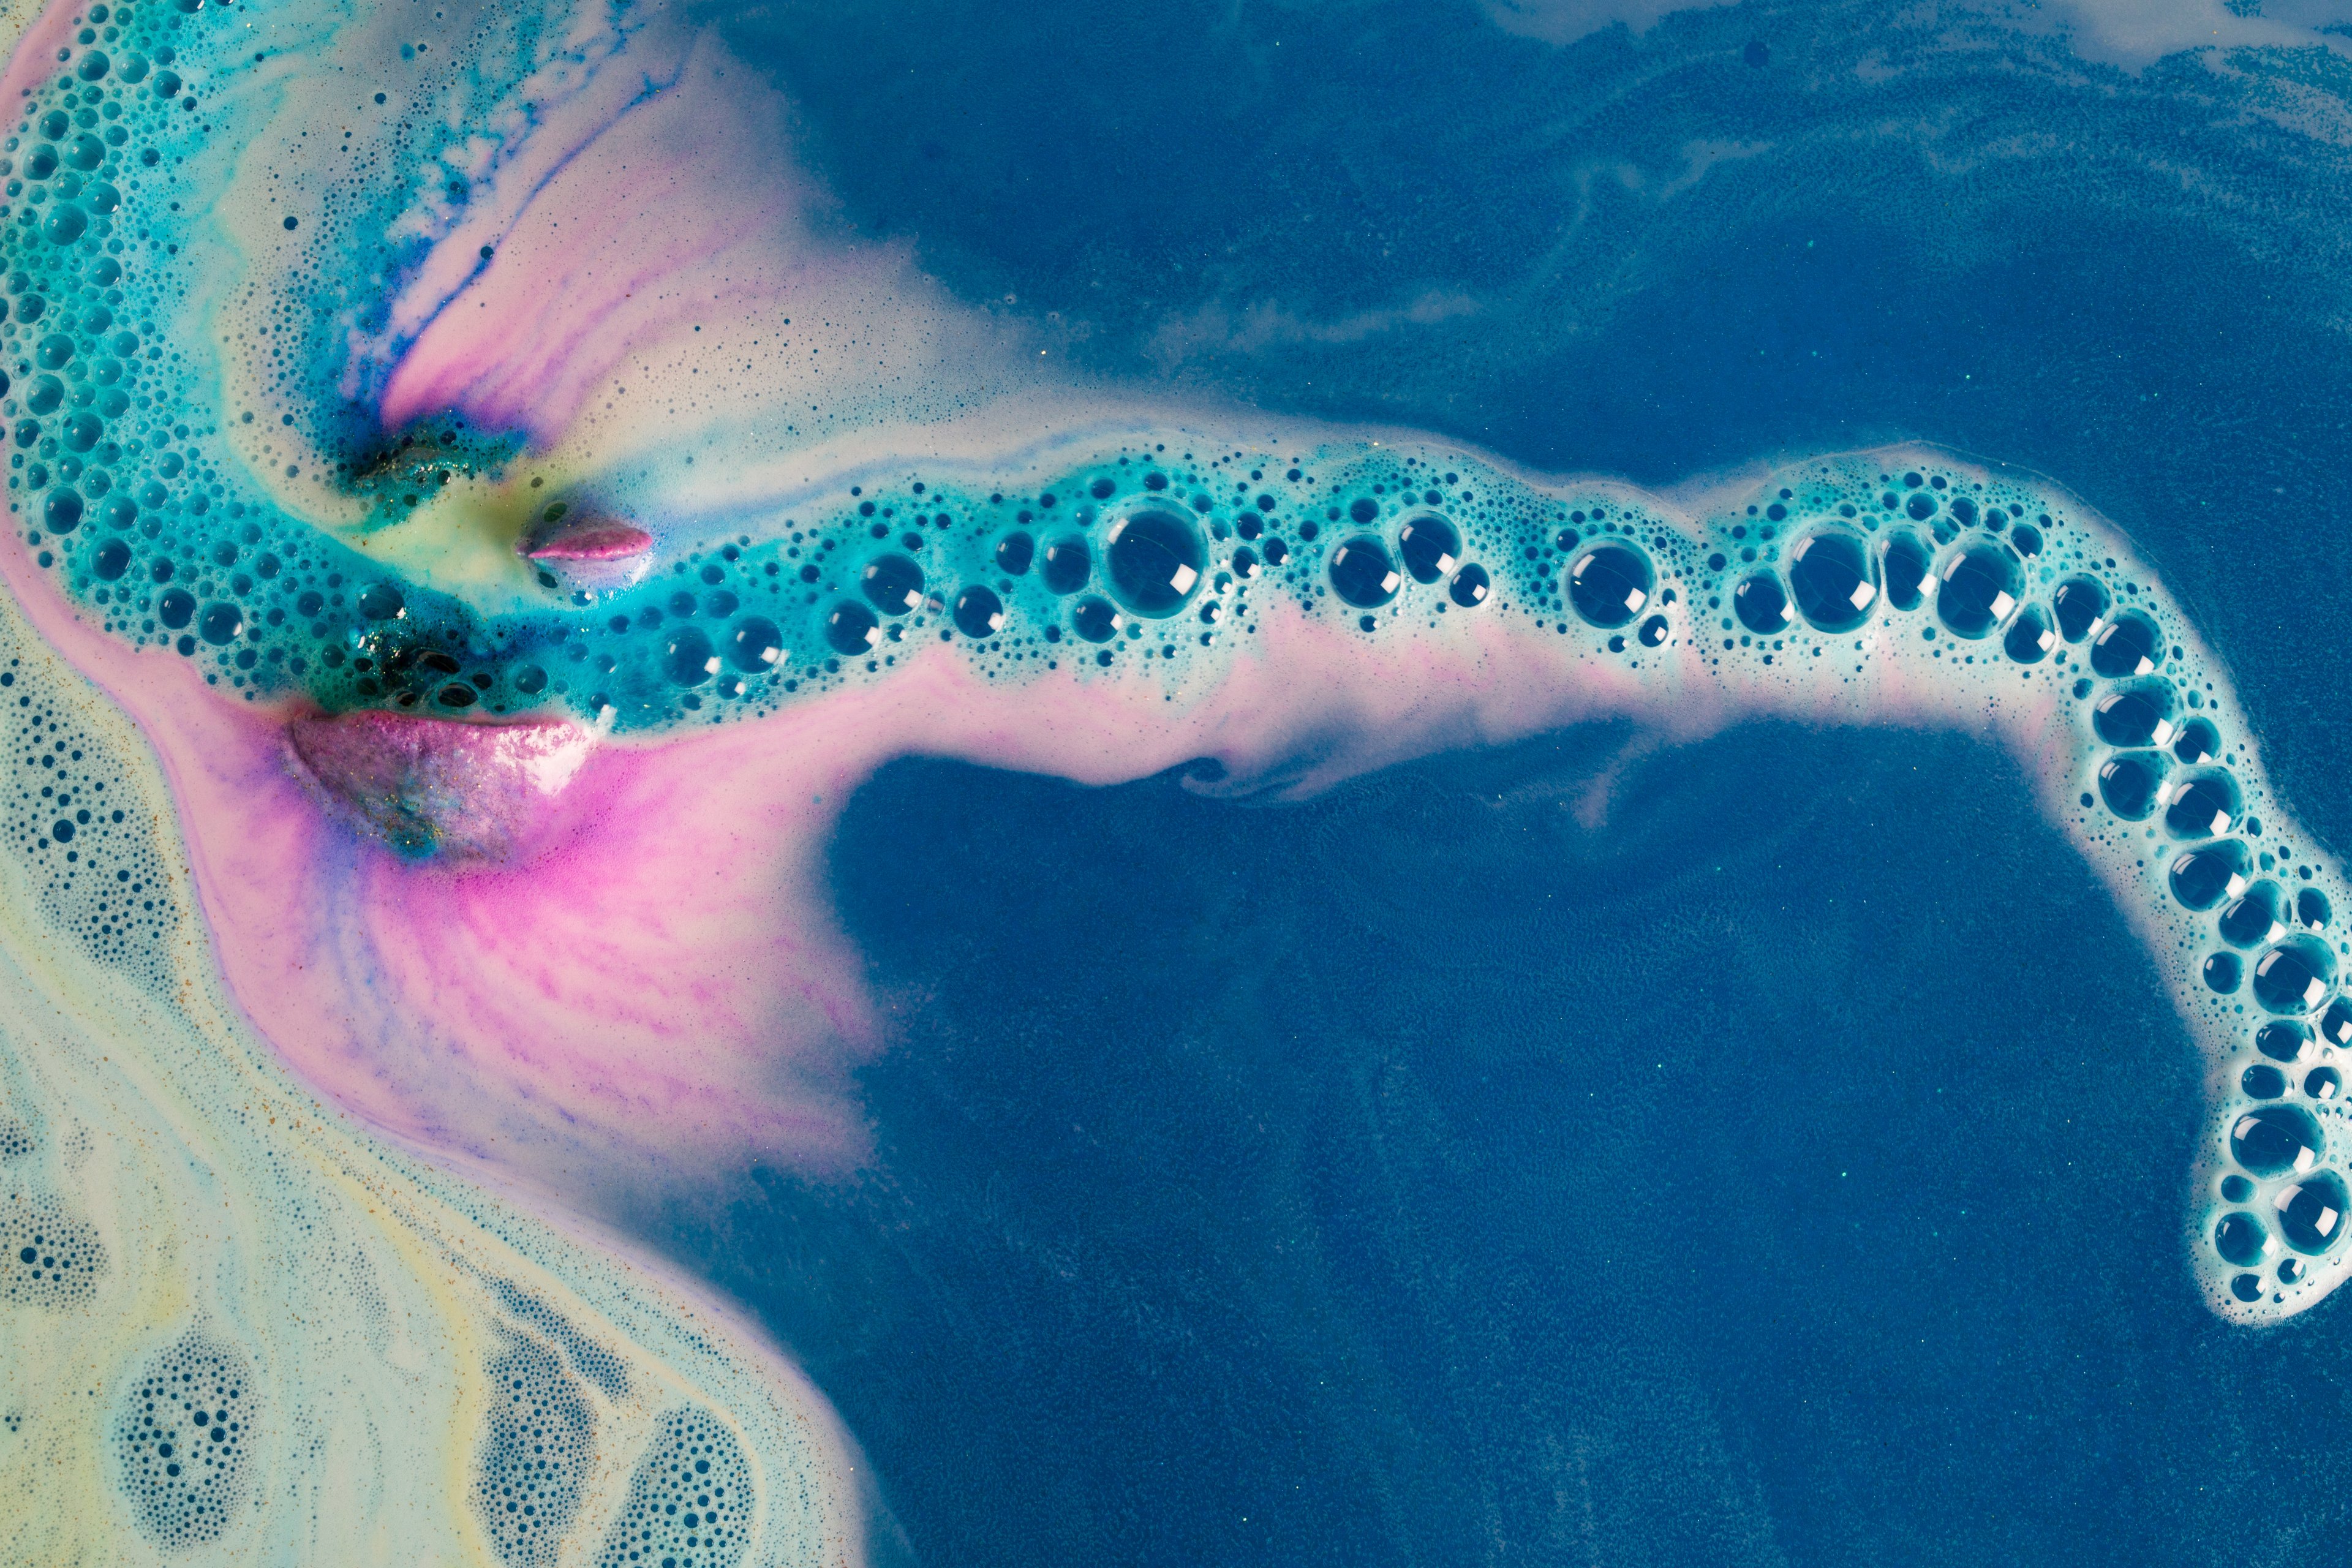 The Intergalactic bath bomb slowly fizzing, creating a solar system of bubbles with pink and blue swirls and hints of yellow.